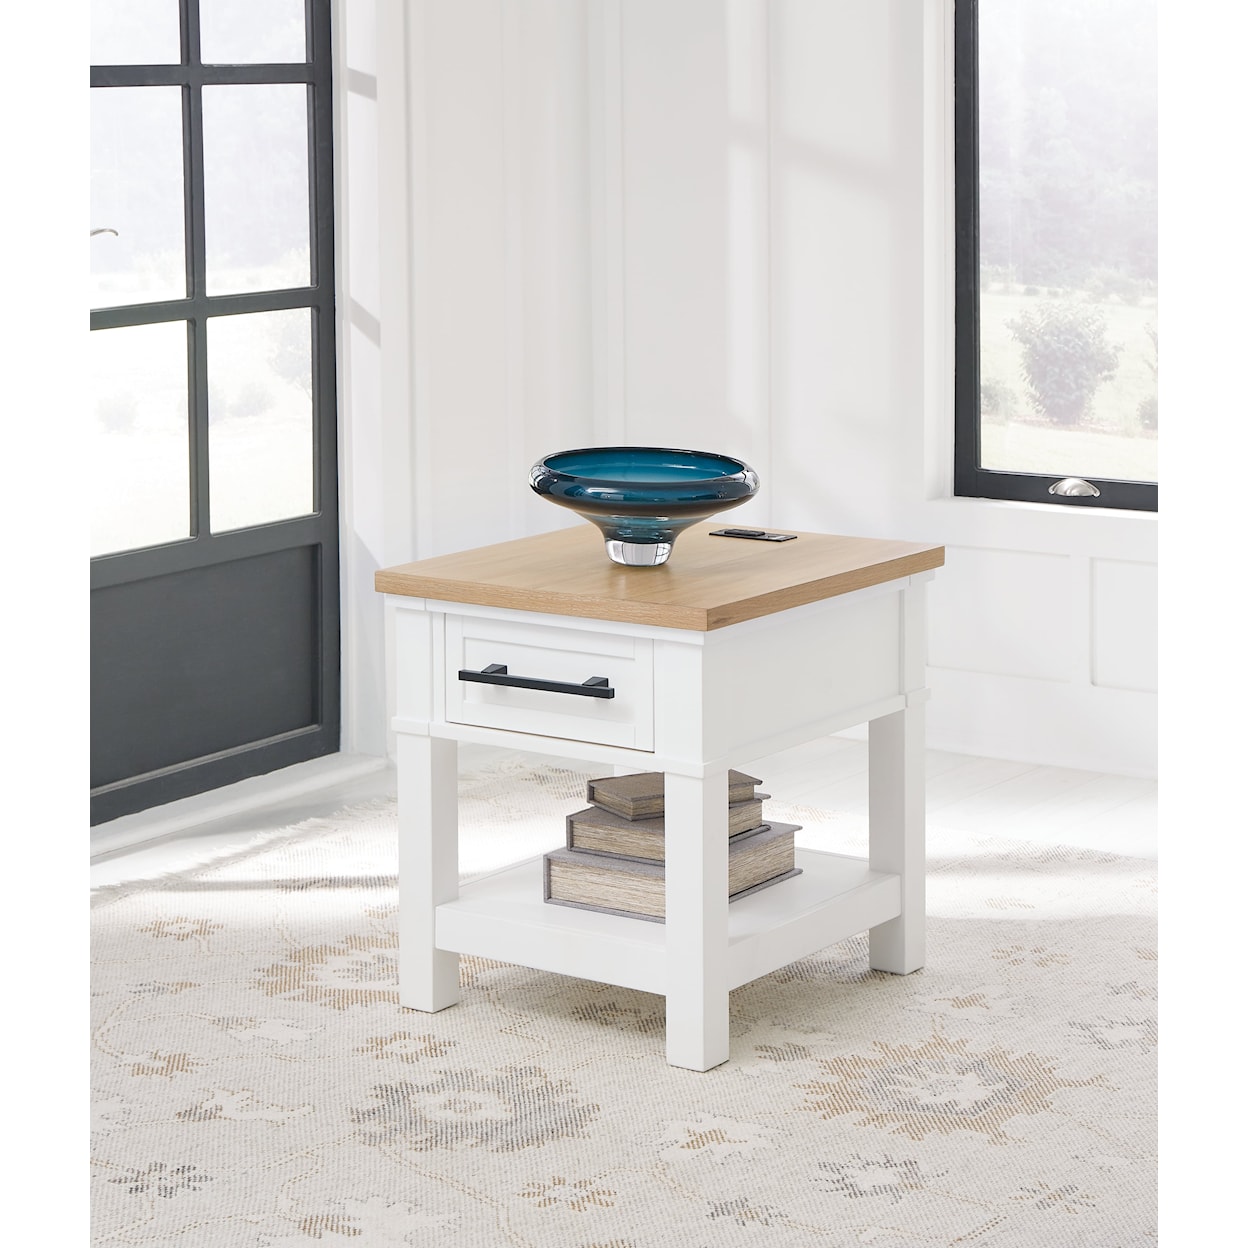 Ashley Furniture Signature Design Ashbryn Coffee Table and 2 End Tables